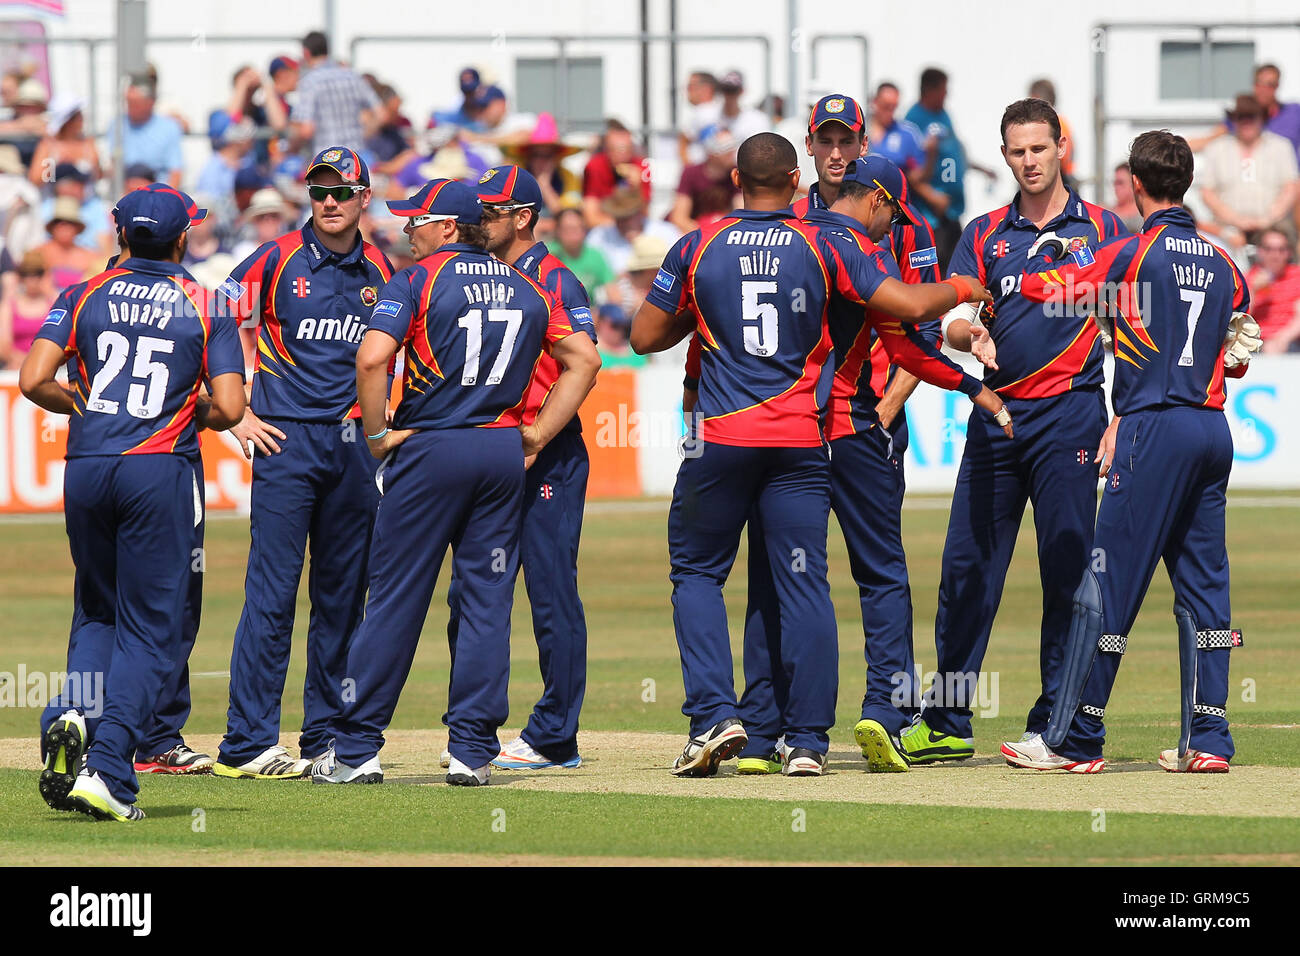 Shaun Tait (2nd R) of Essex is congratulated on the wicket of Scott Styris - Essex Eagles vs Sussex Sharks - Friends Life T20 Cricket at the Essex County Ground,Chelmsford - 14/07/13 Stock Photo